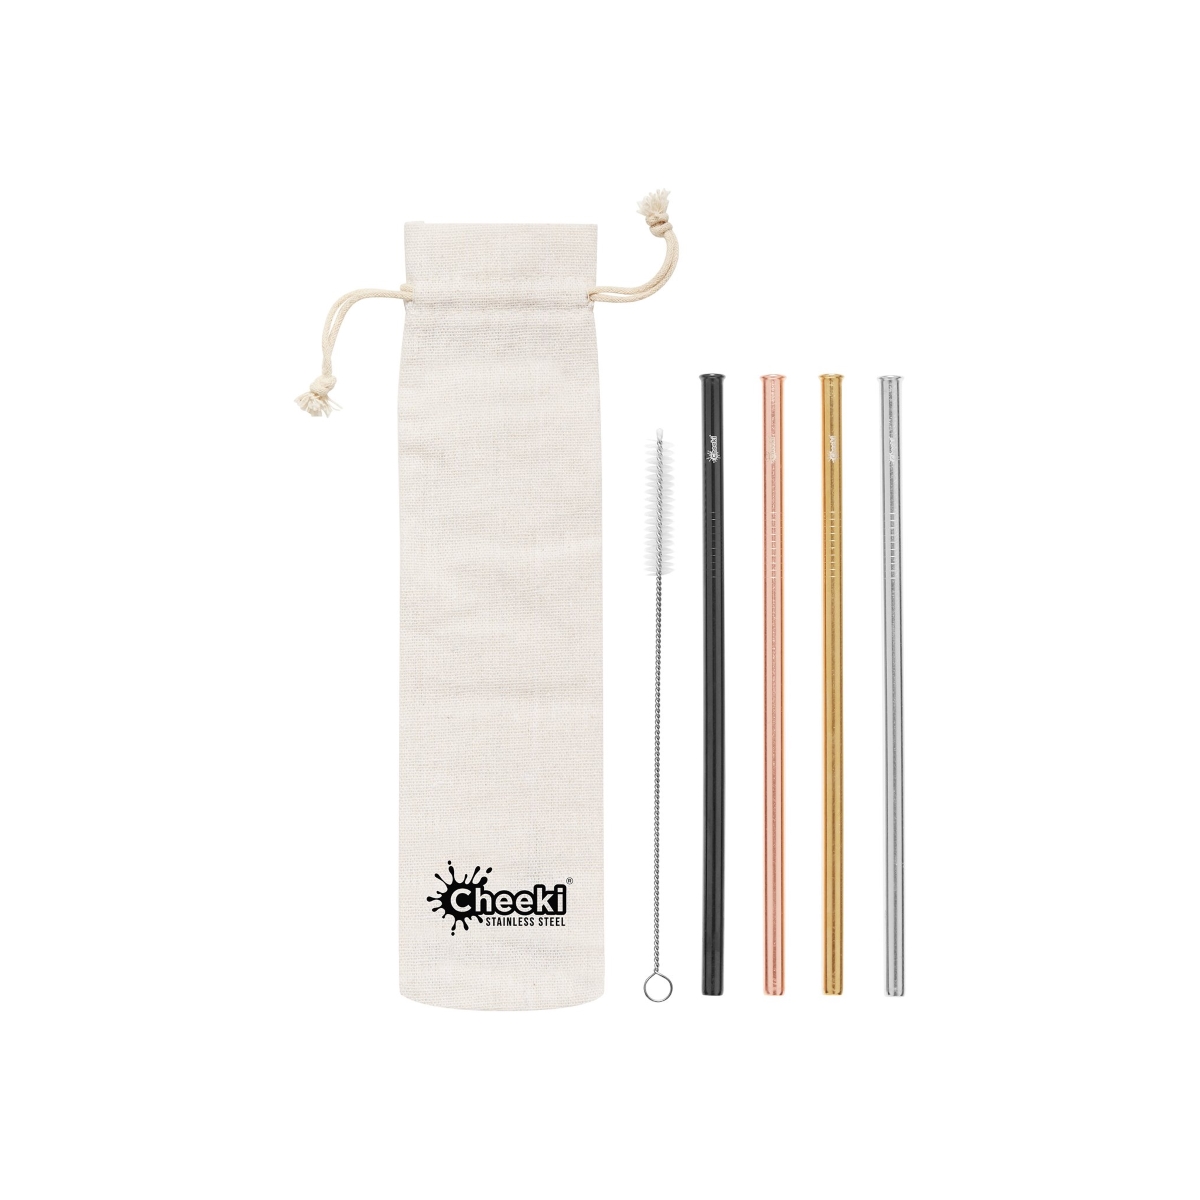 Cheeki 4 Pack Straight Stainless Steel Straws - Silver, Gold, Rose Gold, Black, Cleaning Brush + Bag